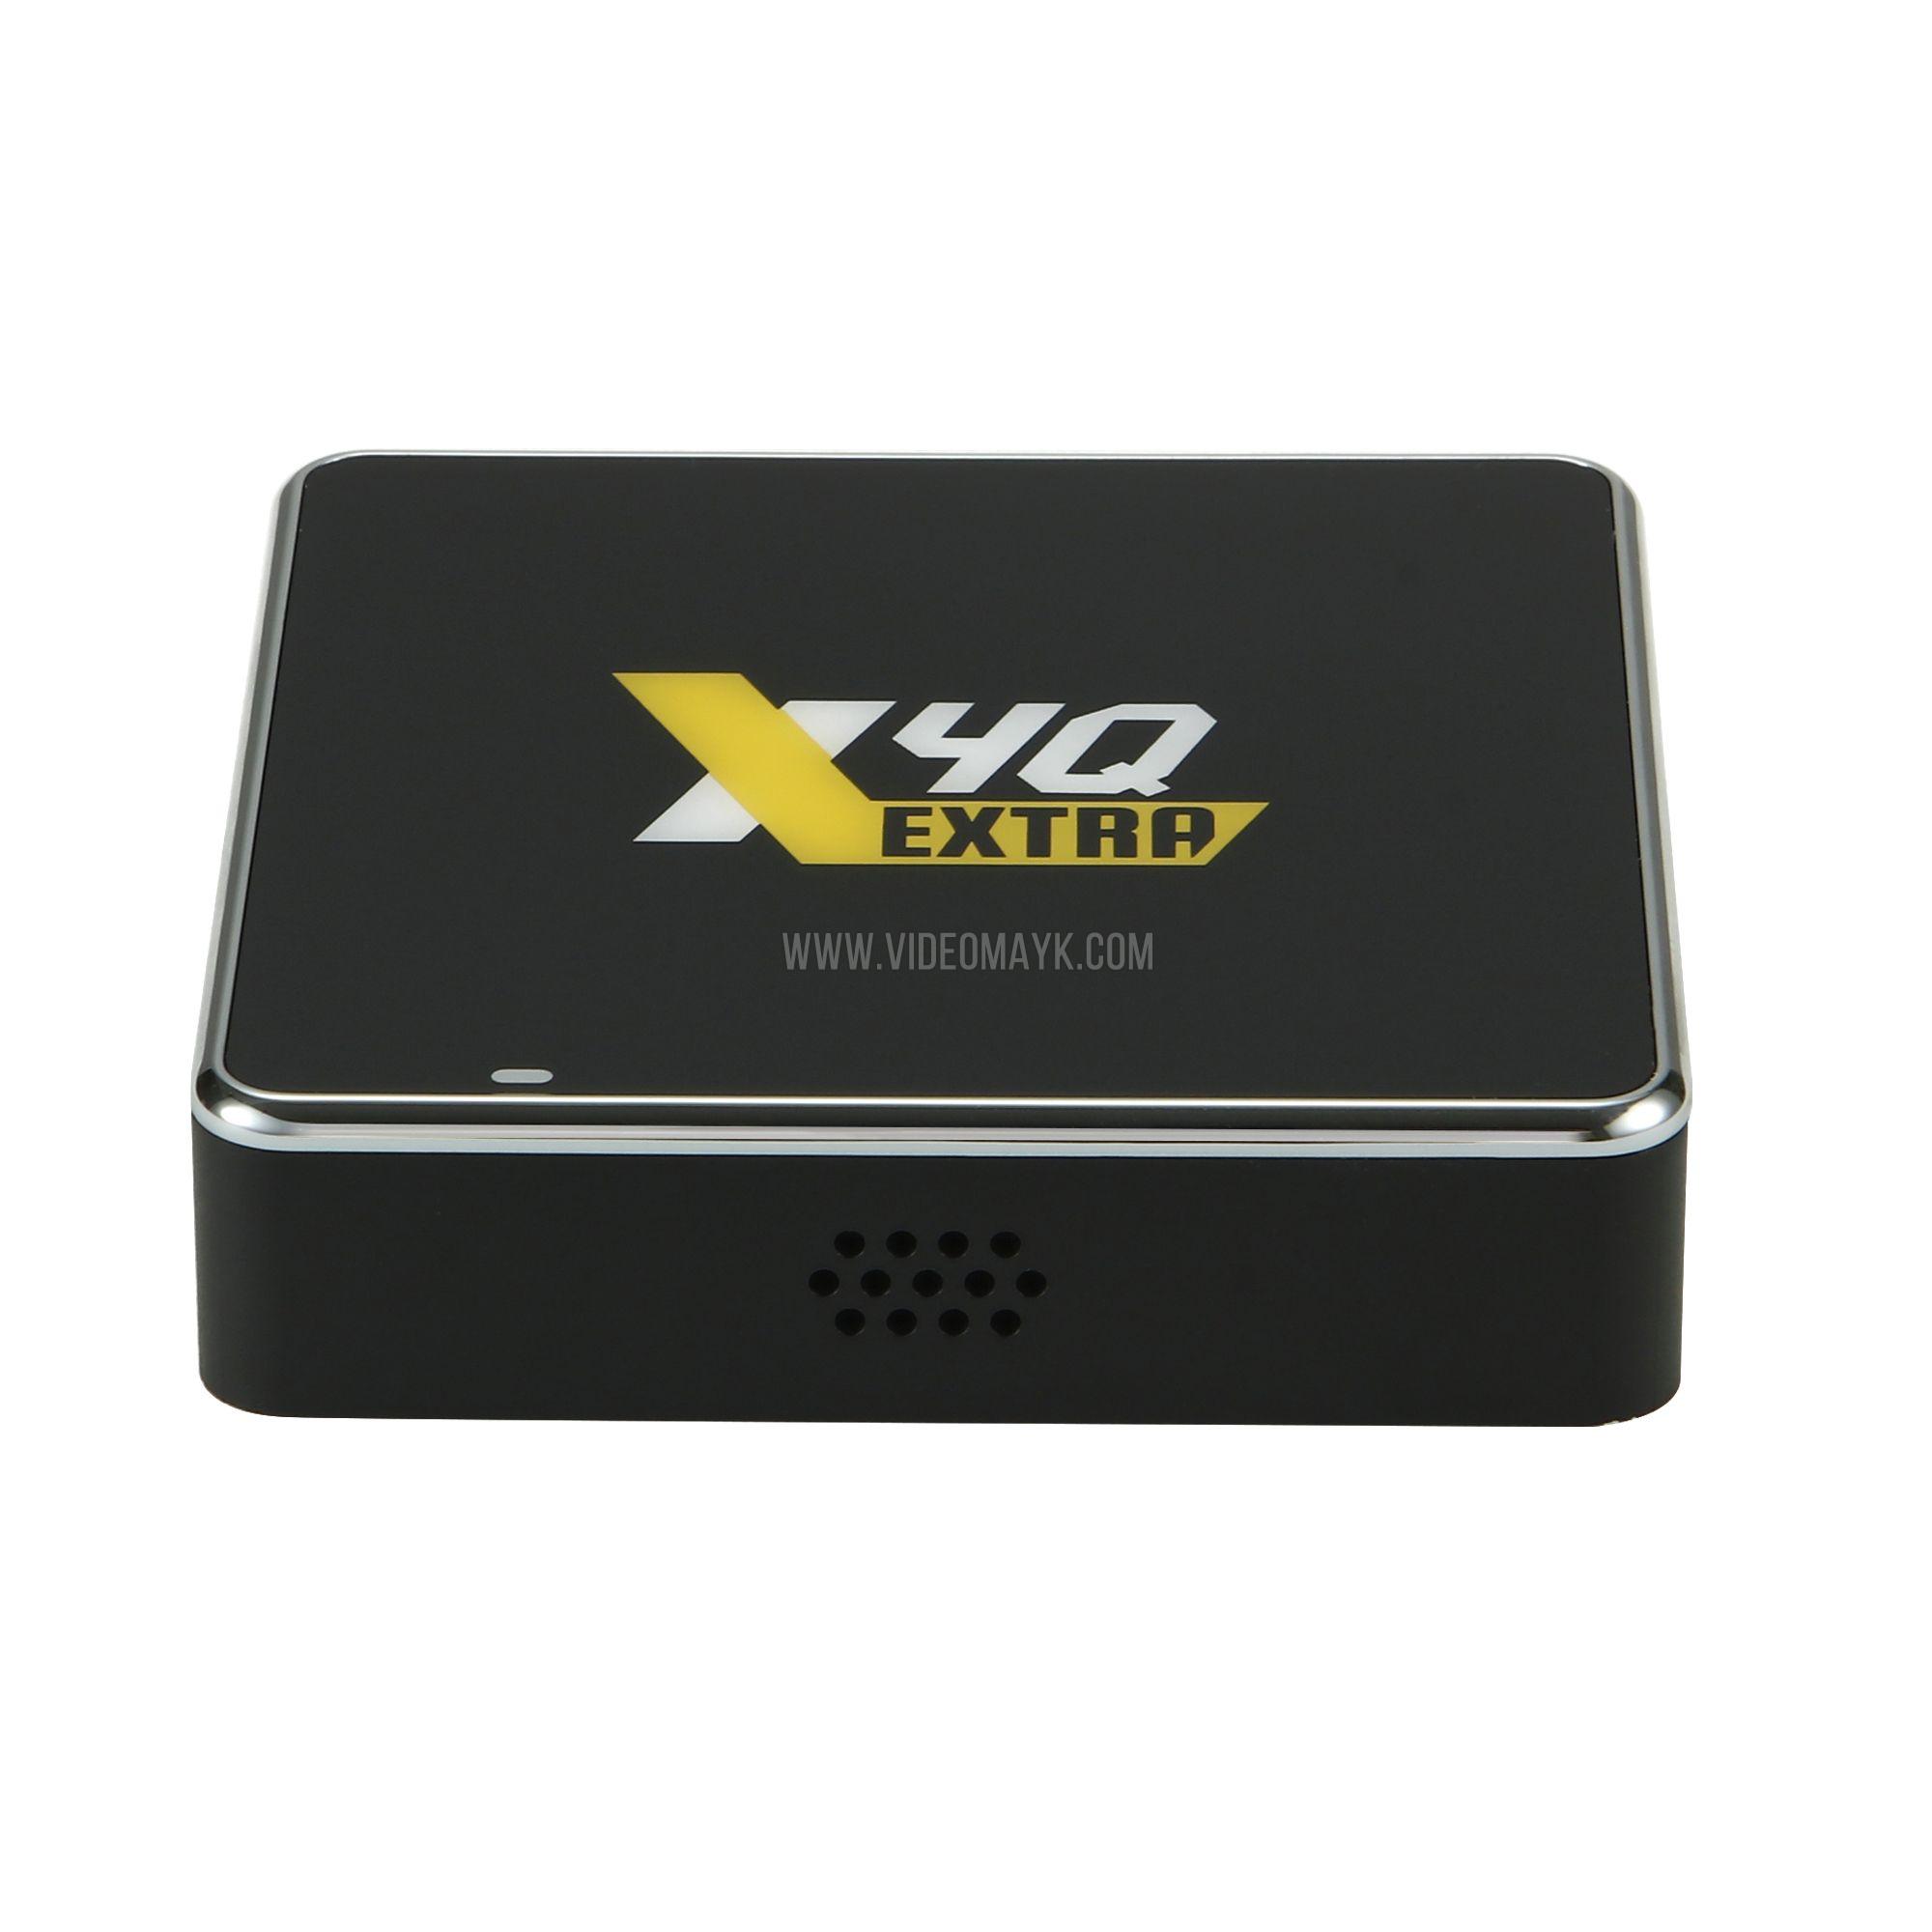 Ugoos X4Q Extra 4/128 ANDROID TV BOX